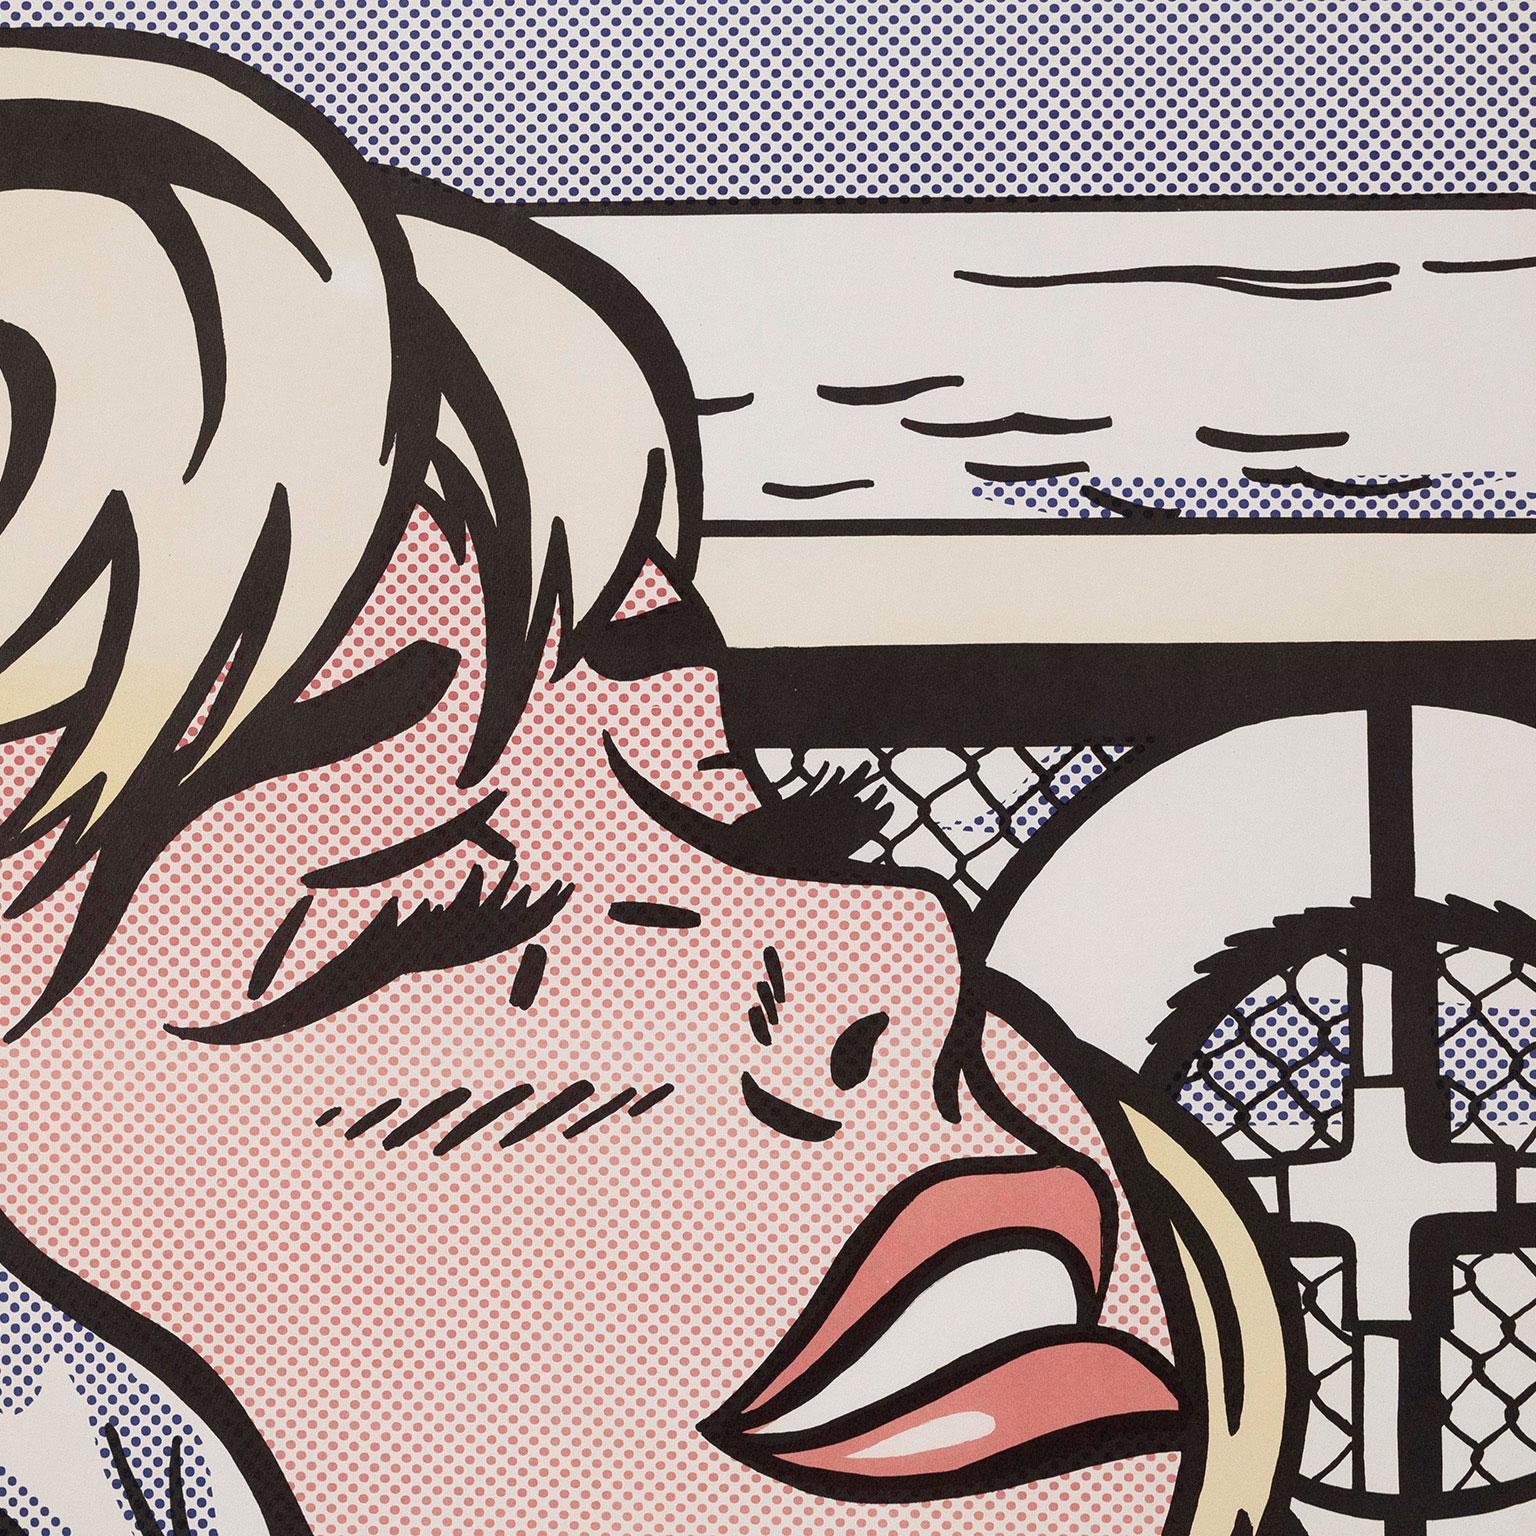 Roy Lichtenstein (1923-1997) was one of the most successful and influential artists of the 20th century, helping pioneer and define Pop Art in the 1960s.

Lichtenstein's signature style mined both images and techniques from comic books and